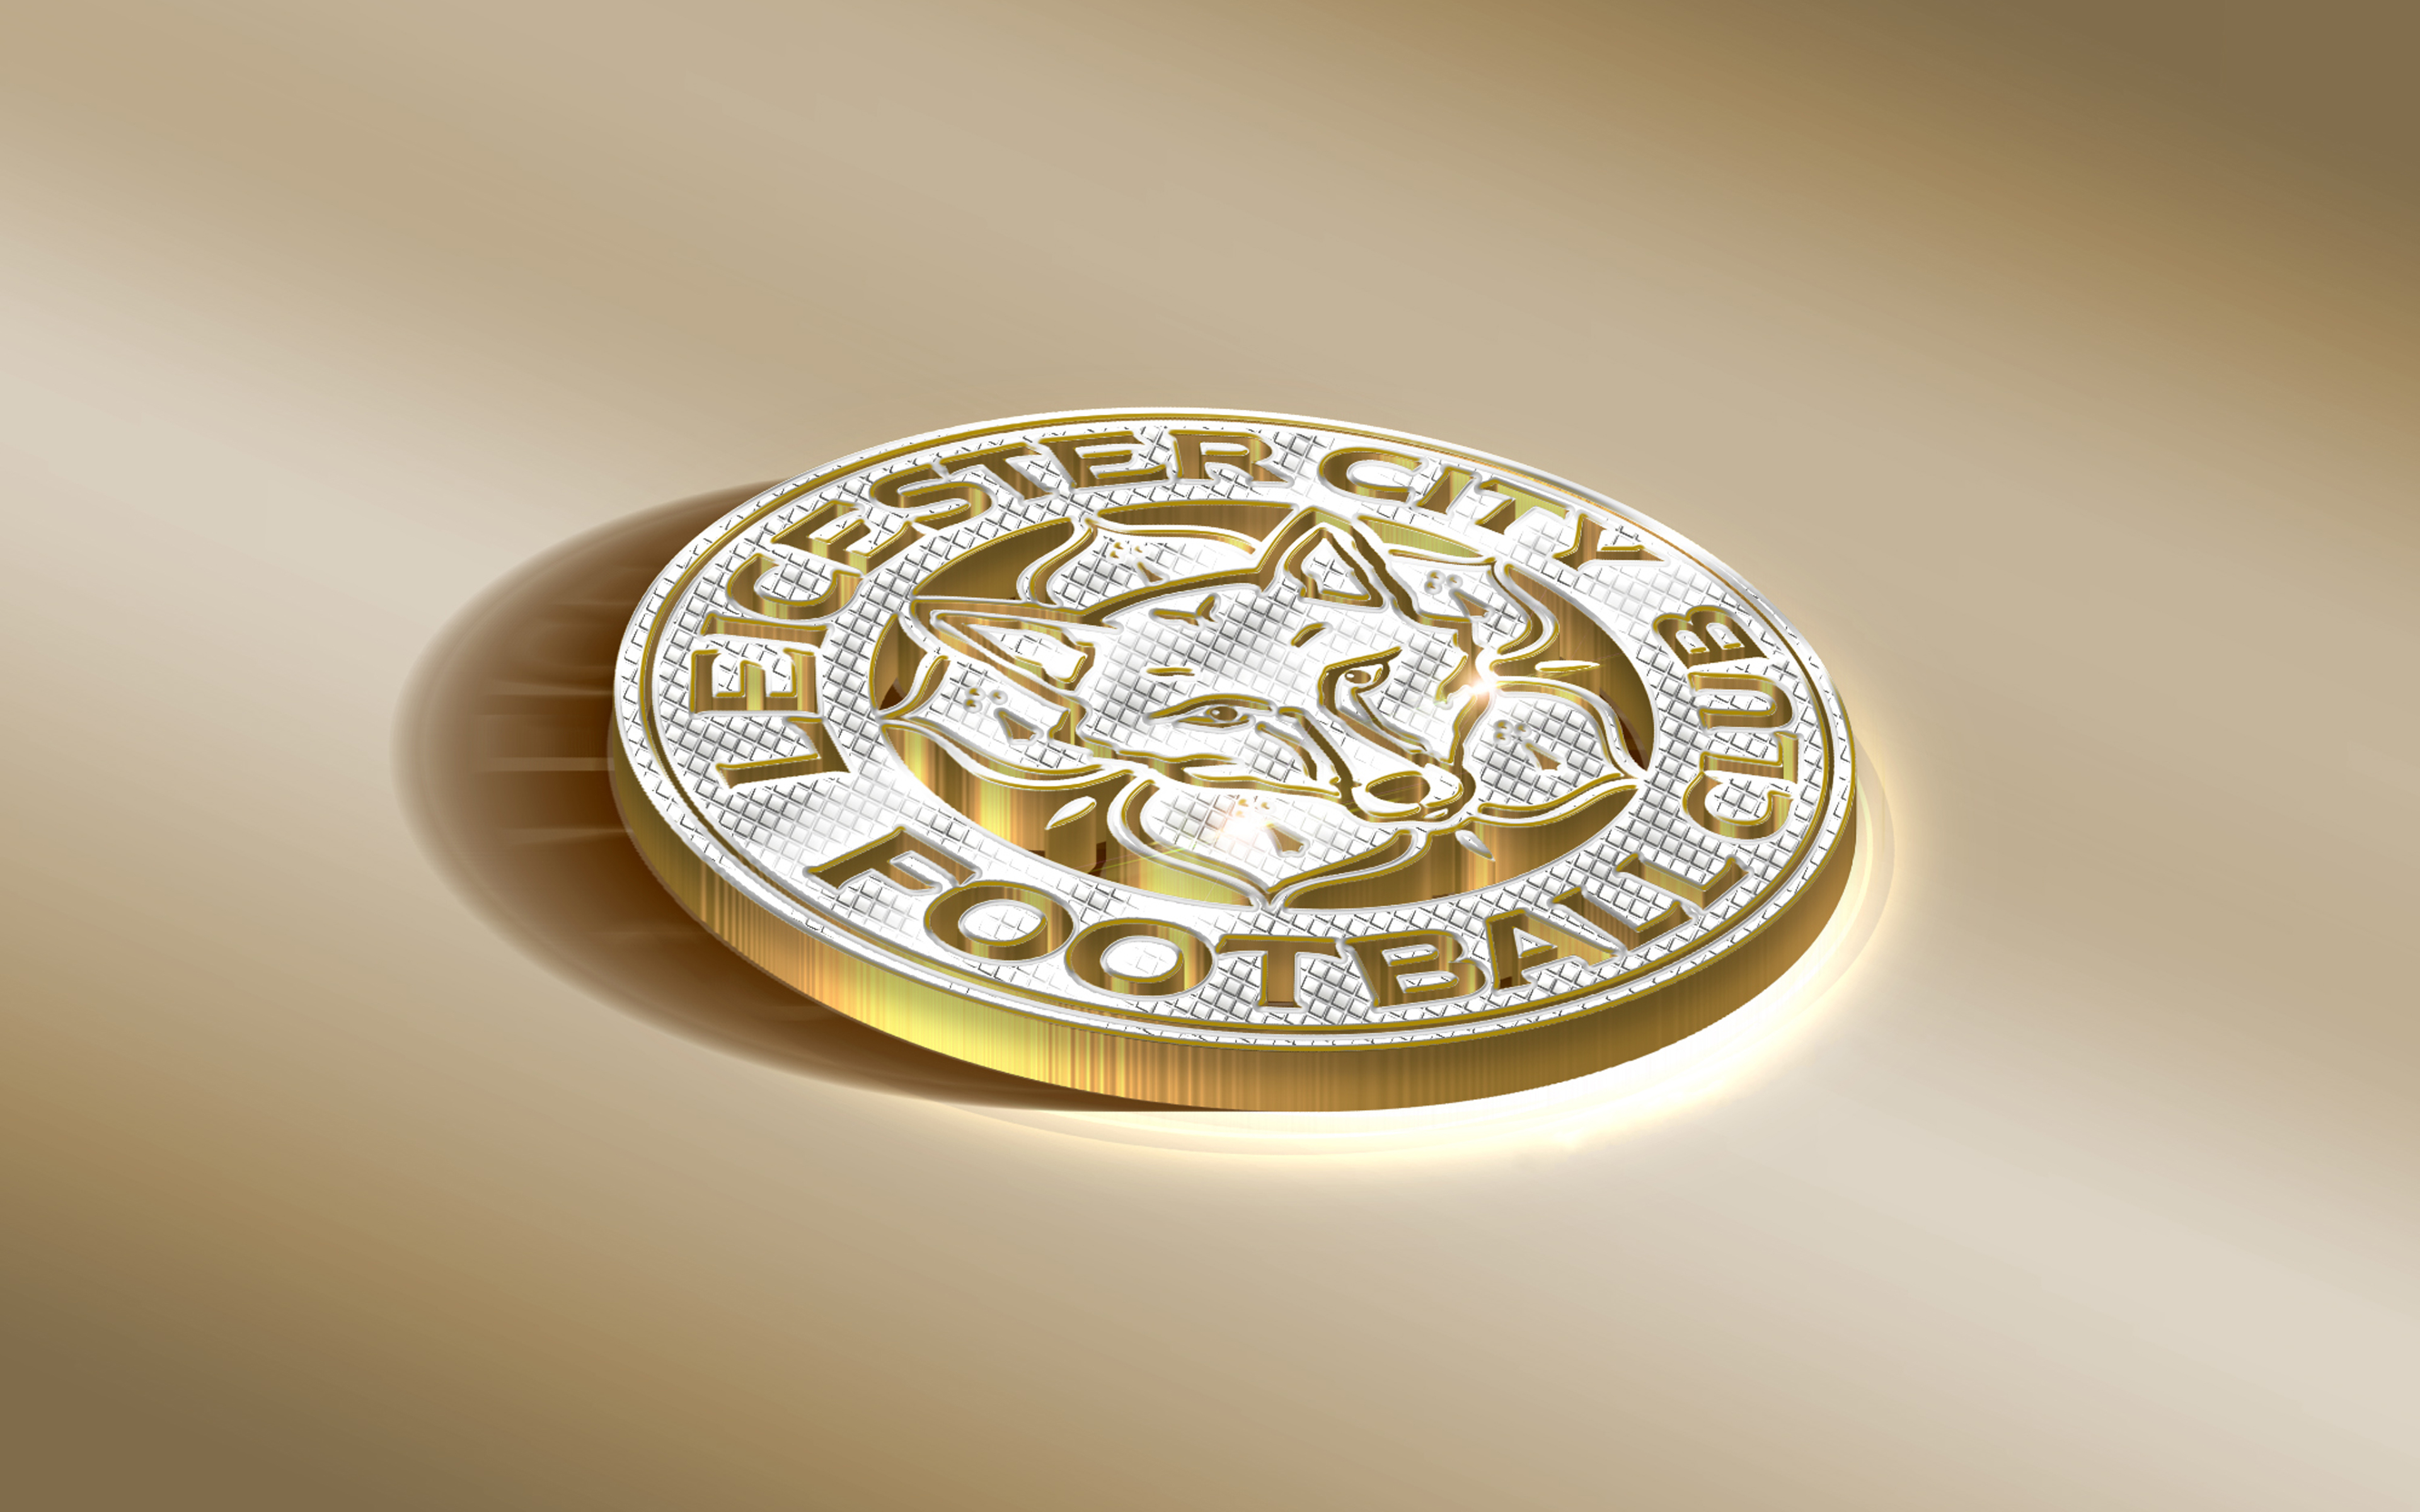 sports, leicester city f c, logo, soccer